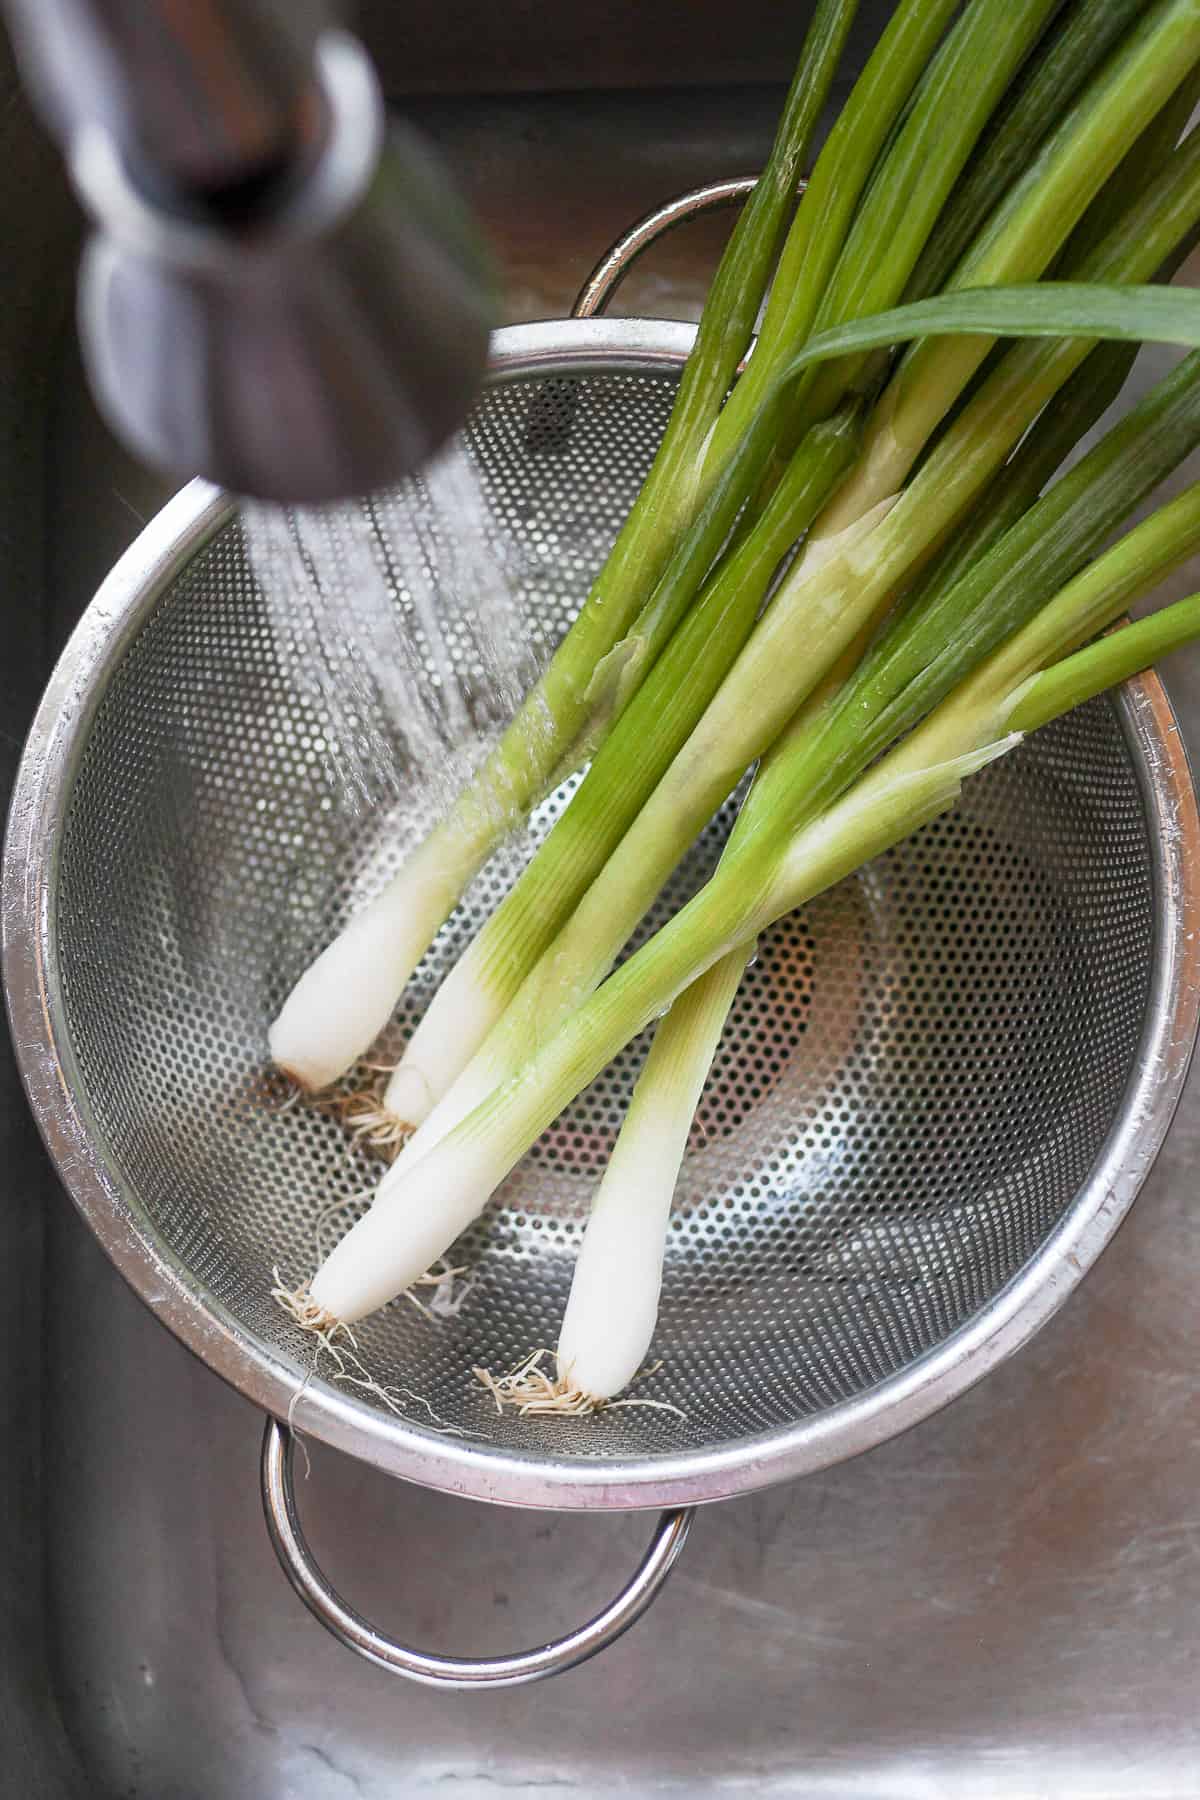 Washing green onions in colander with water in sink